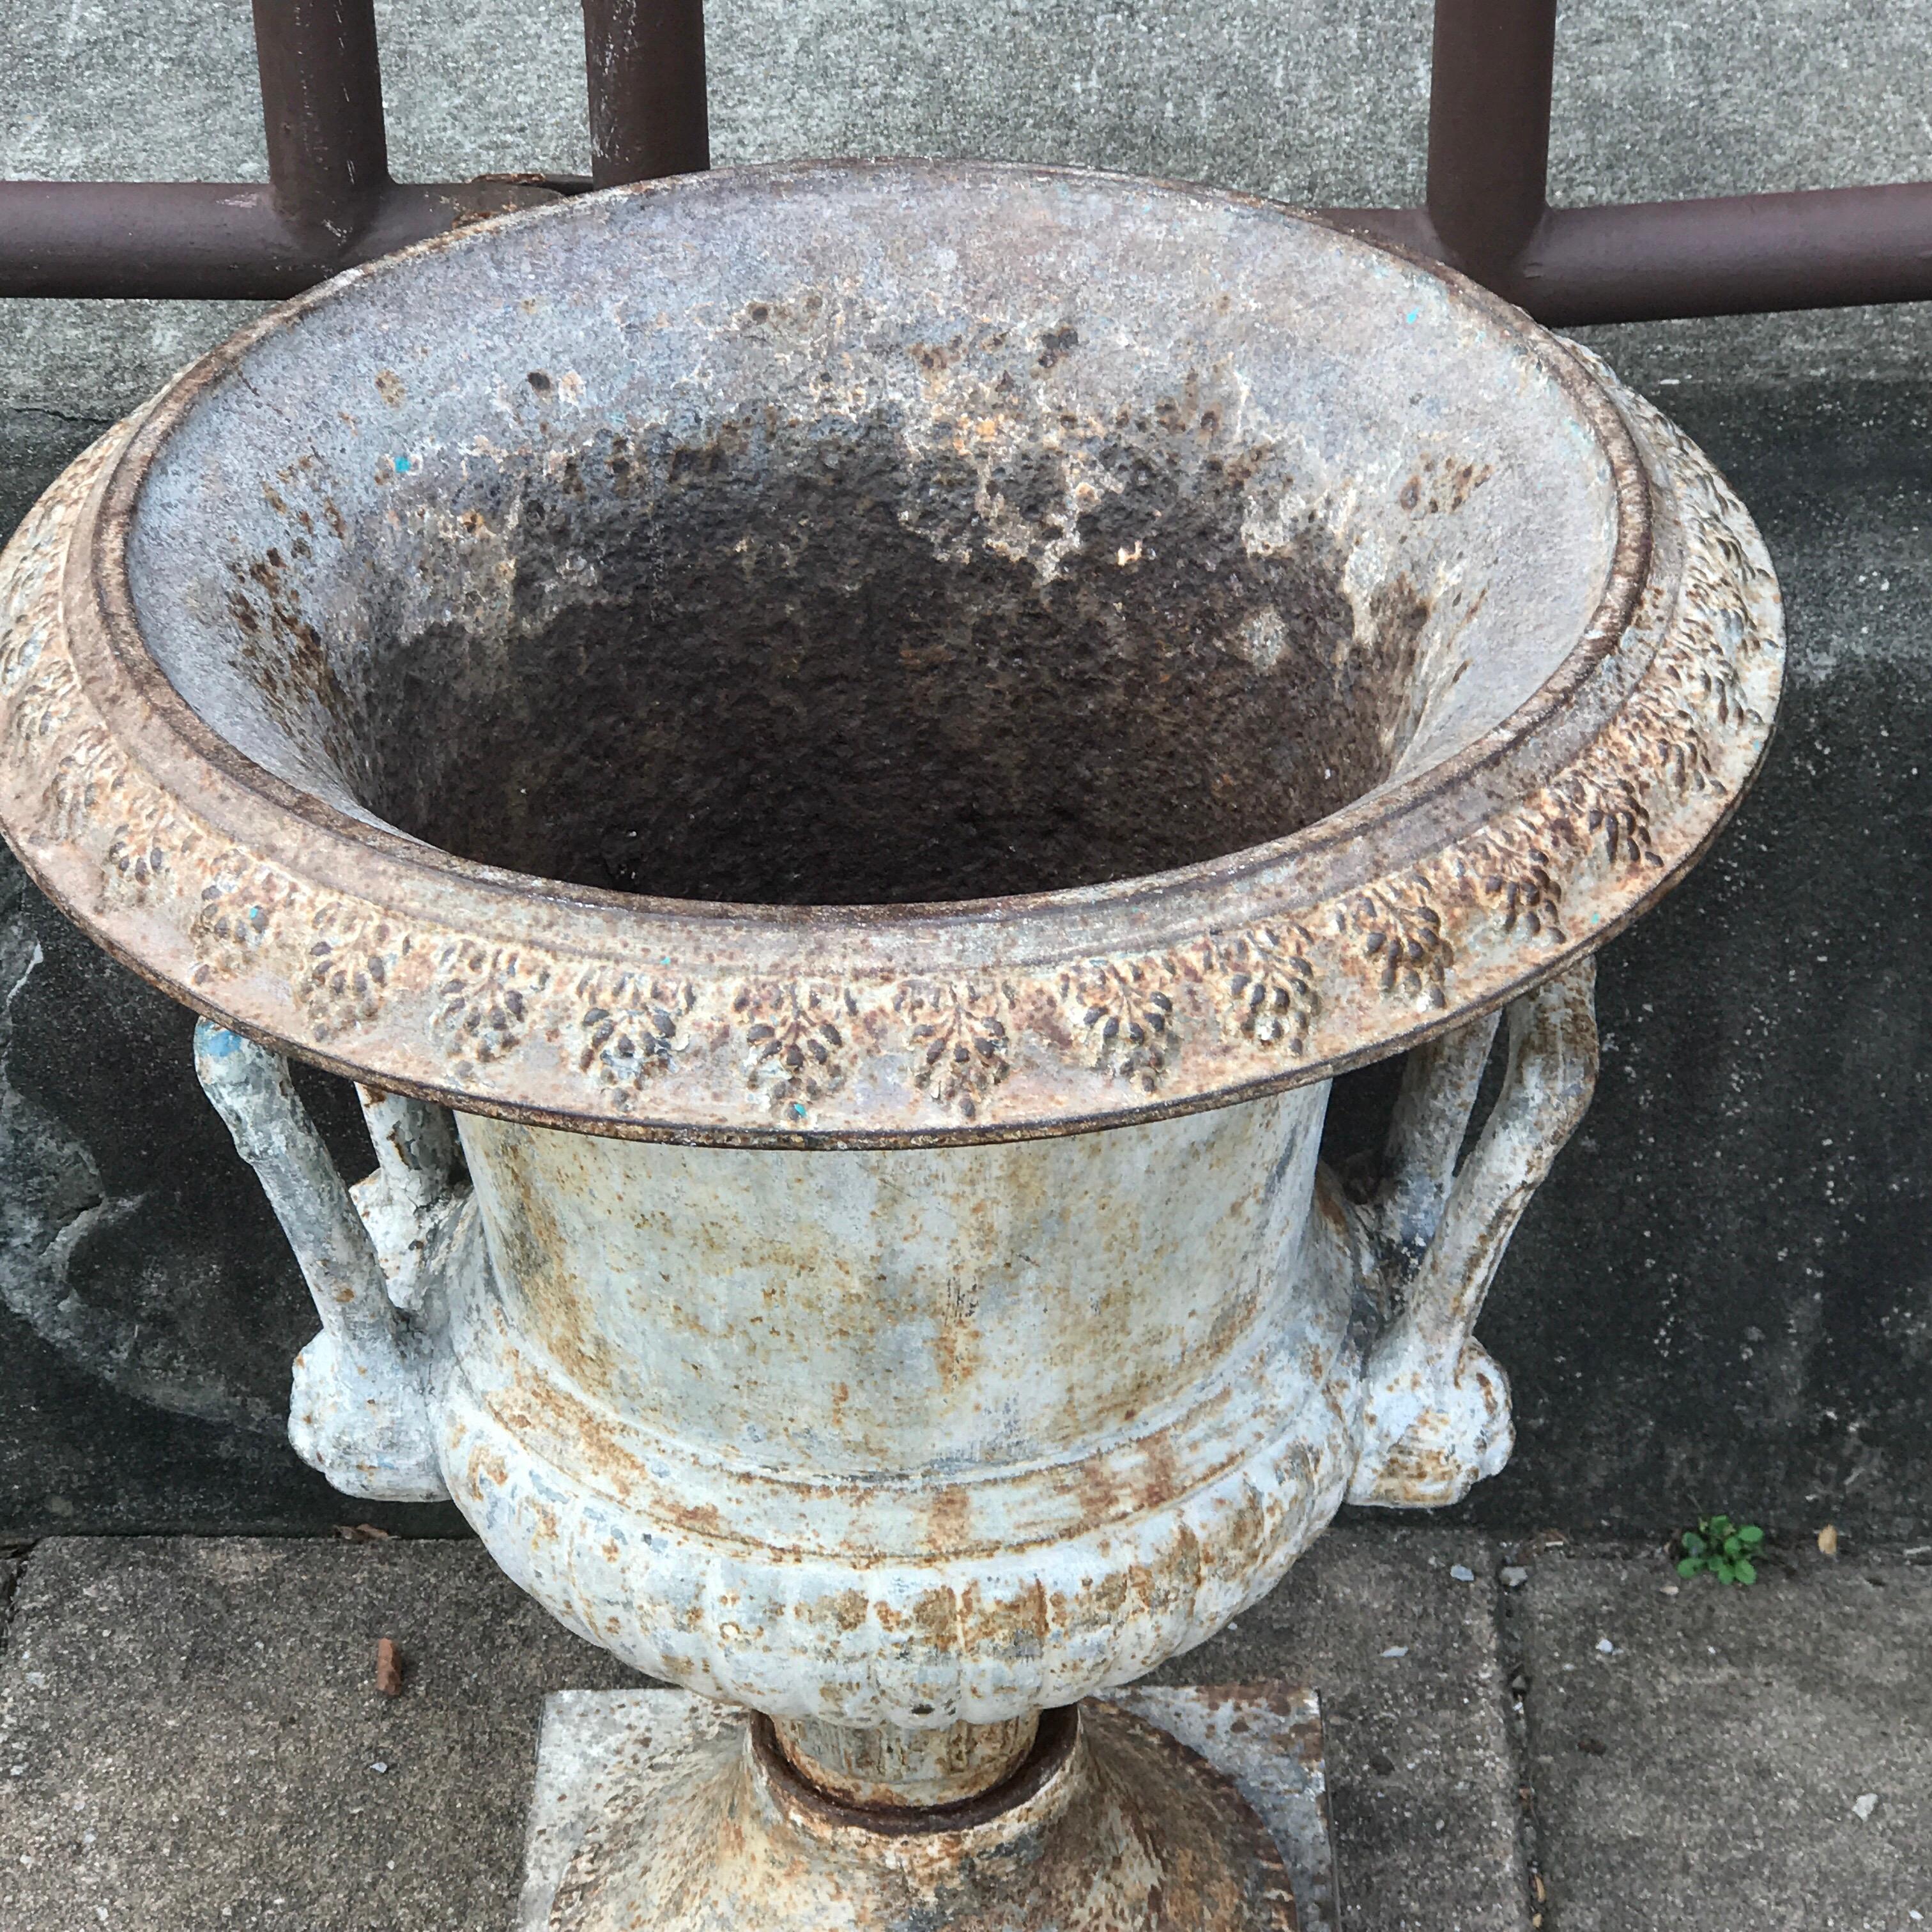 Single antique English cast iron garden urn, stamped Spicer & Peckham, 1887, in three parts, distressed verdigris patina, with acanthus handles. Interior measurements are 16